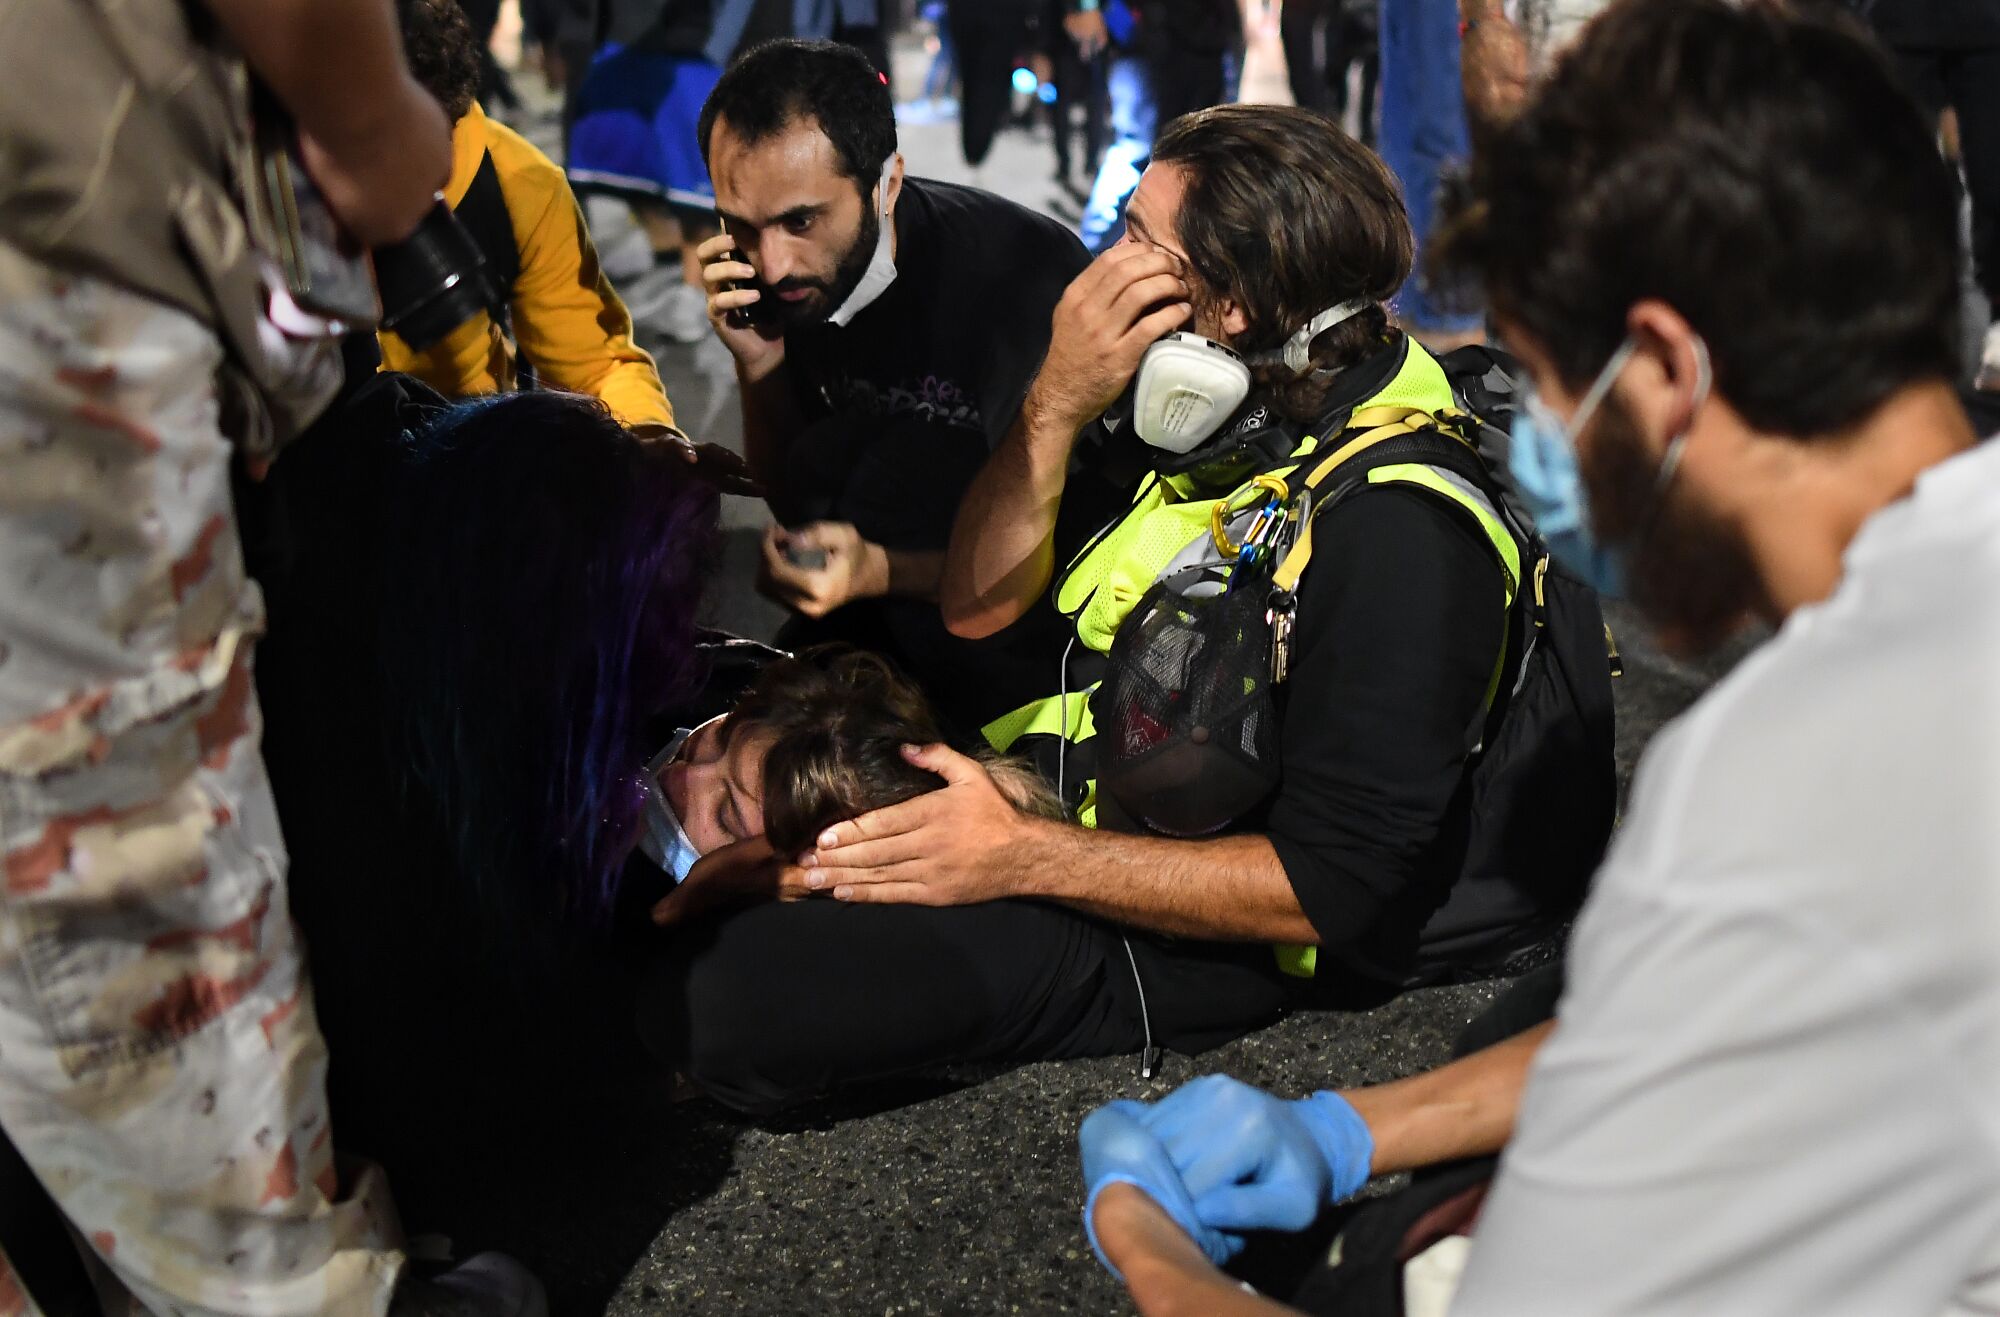 Paramedics treat a protester who was hit by a truck on Sunset Boulevard on Thursday night.